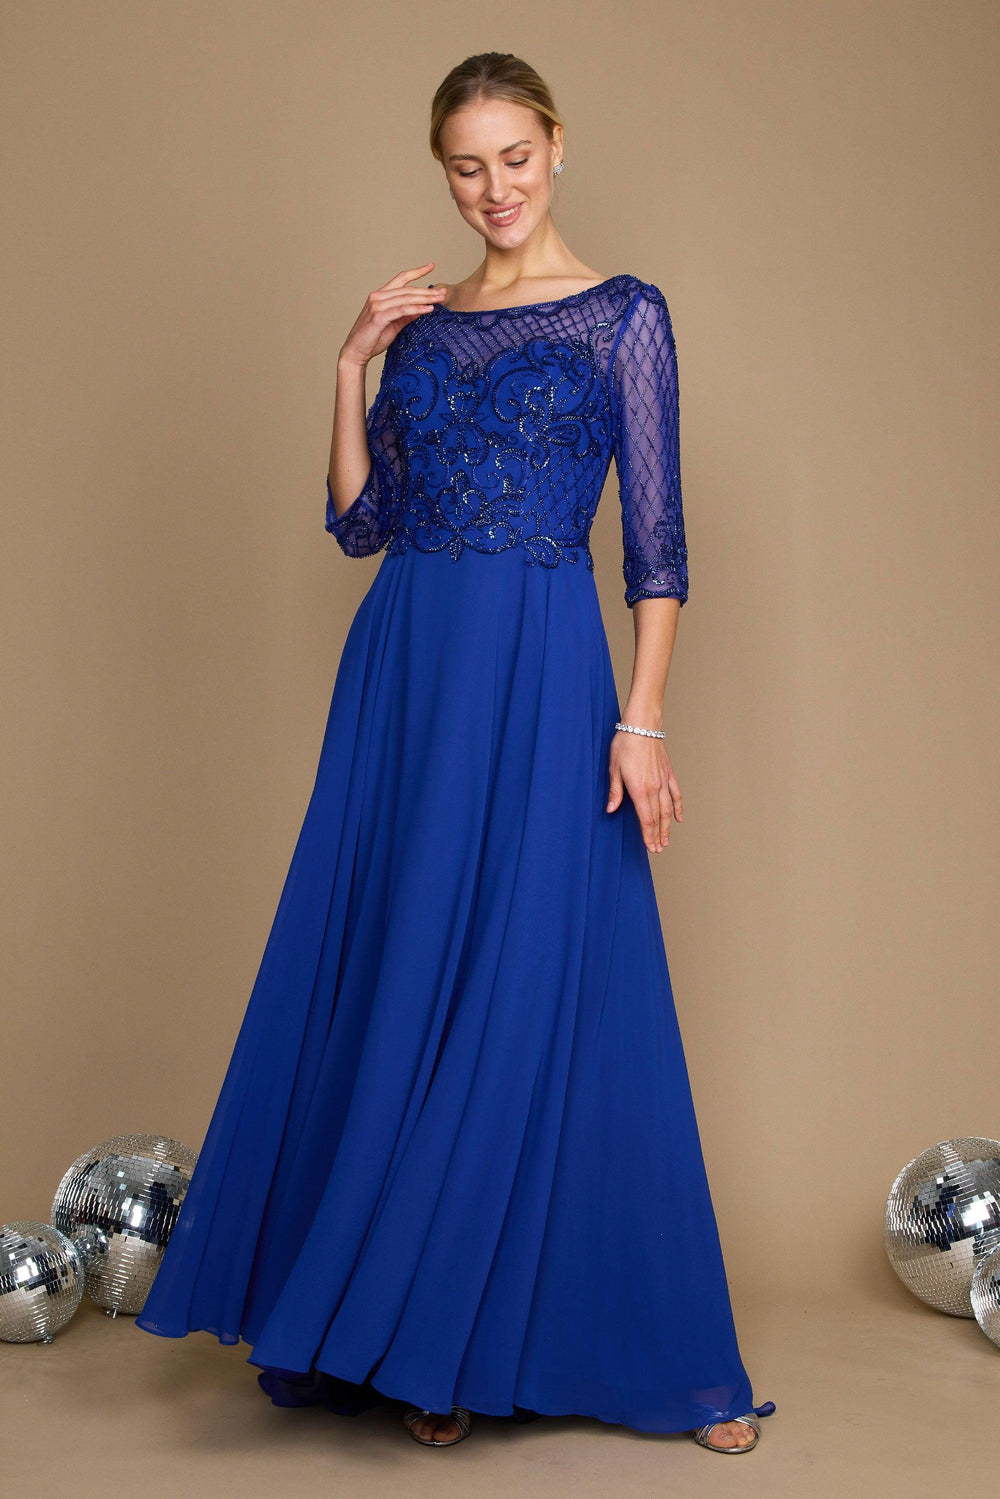 Cinderella Divine CD0172 Long Sleeve Prom Dress for $225.0 – The Dress ...